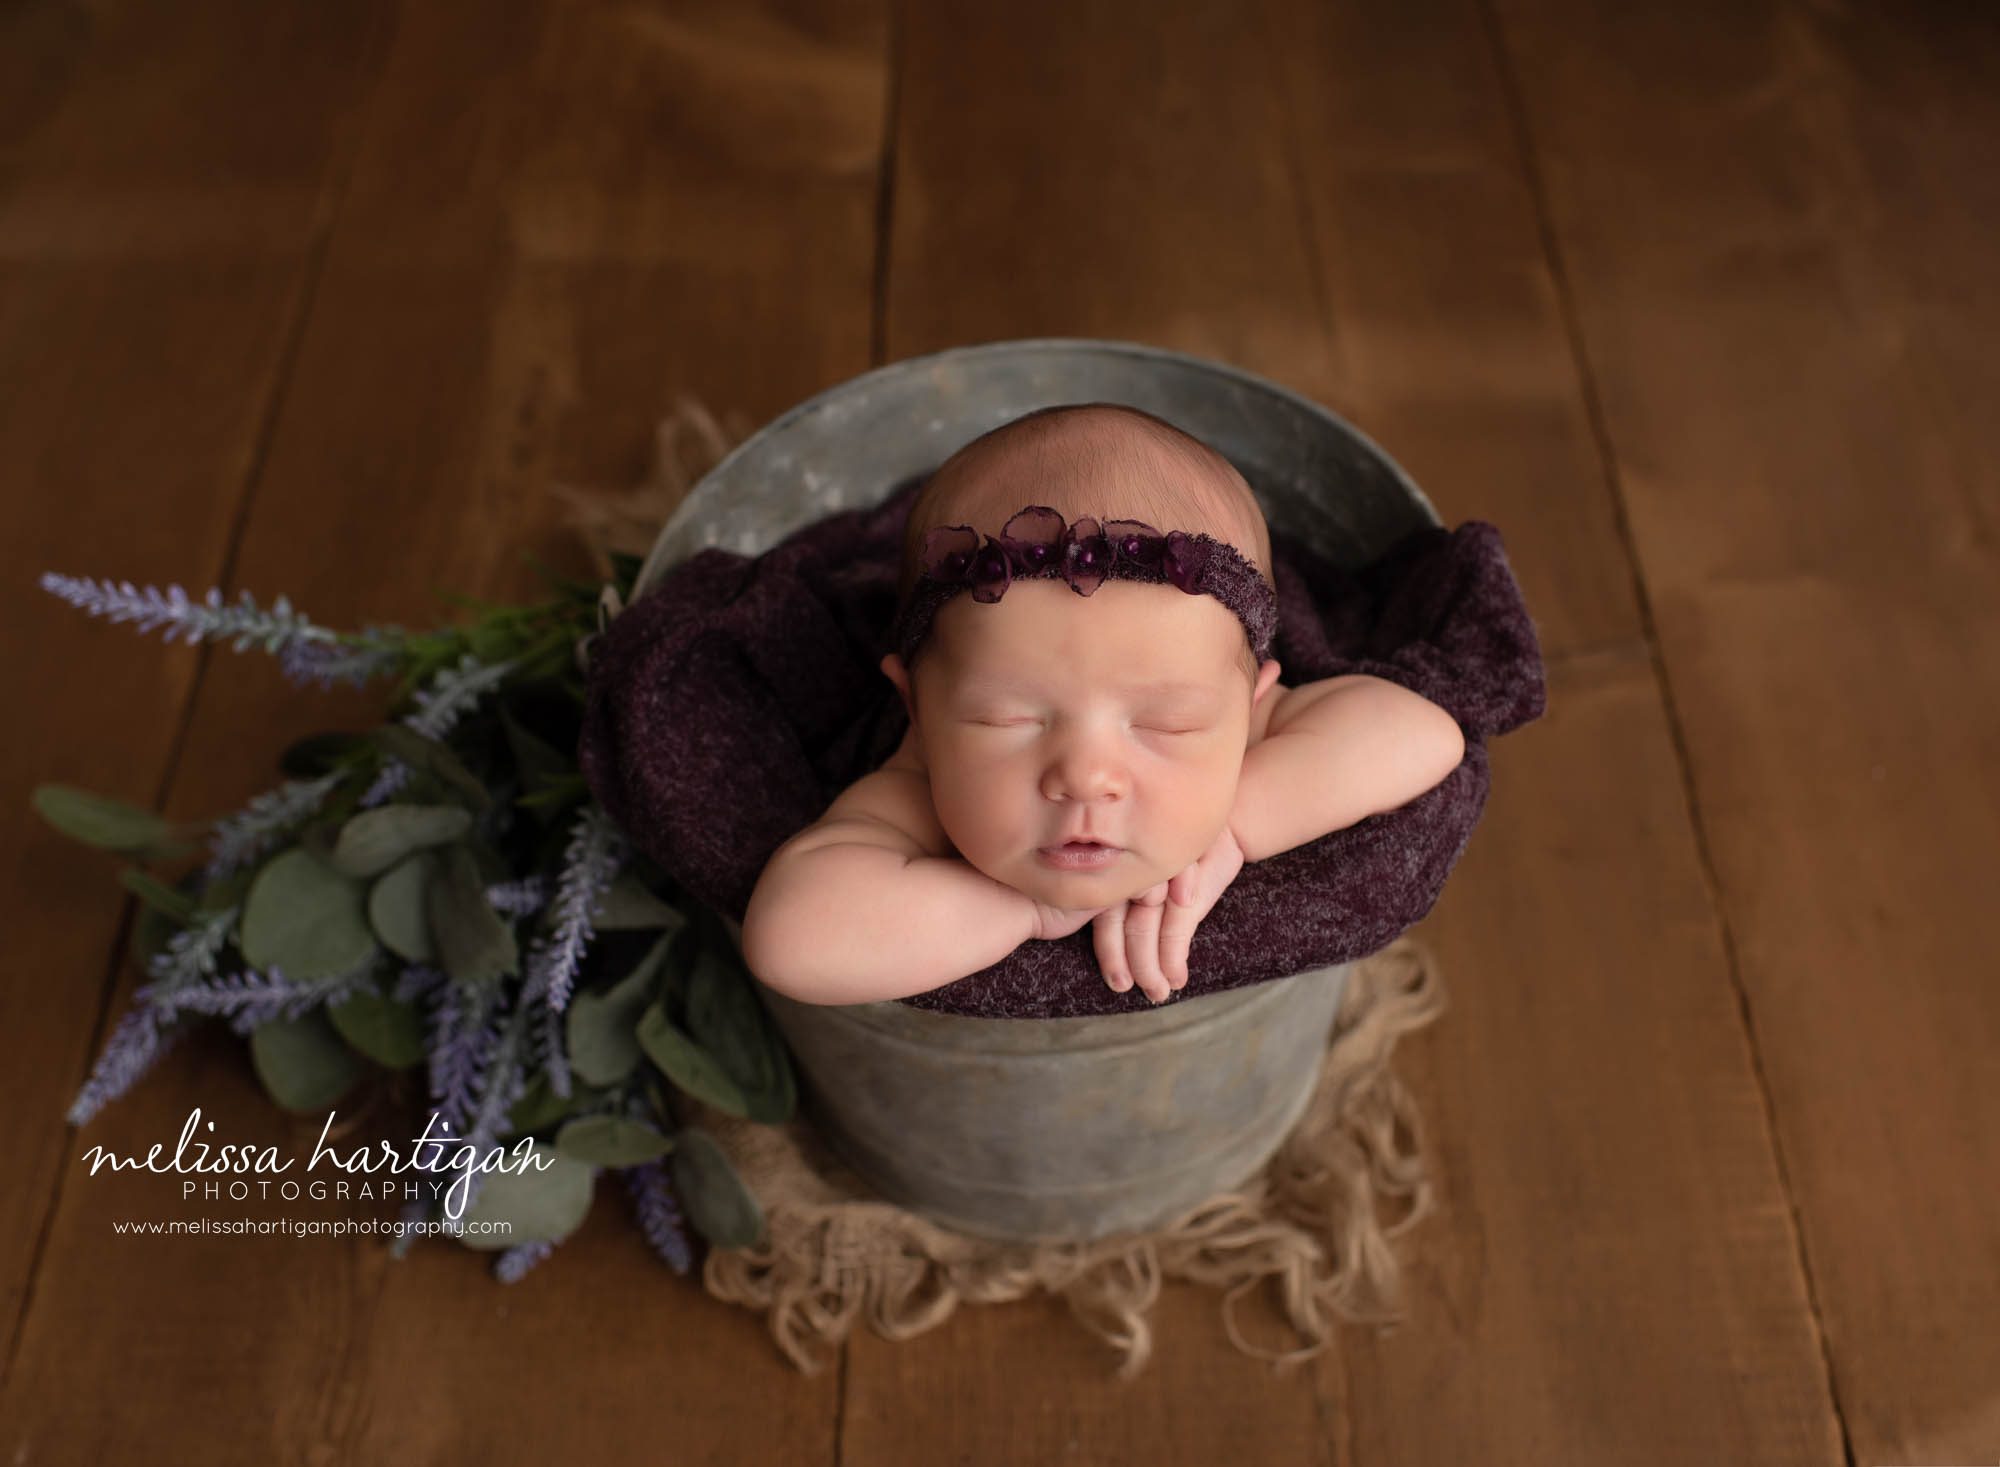 newborn baby girl posed in bucket with greenery and floral elements